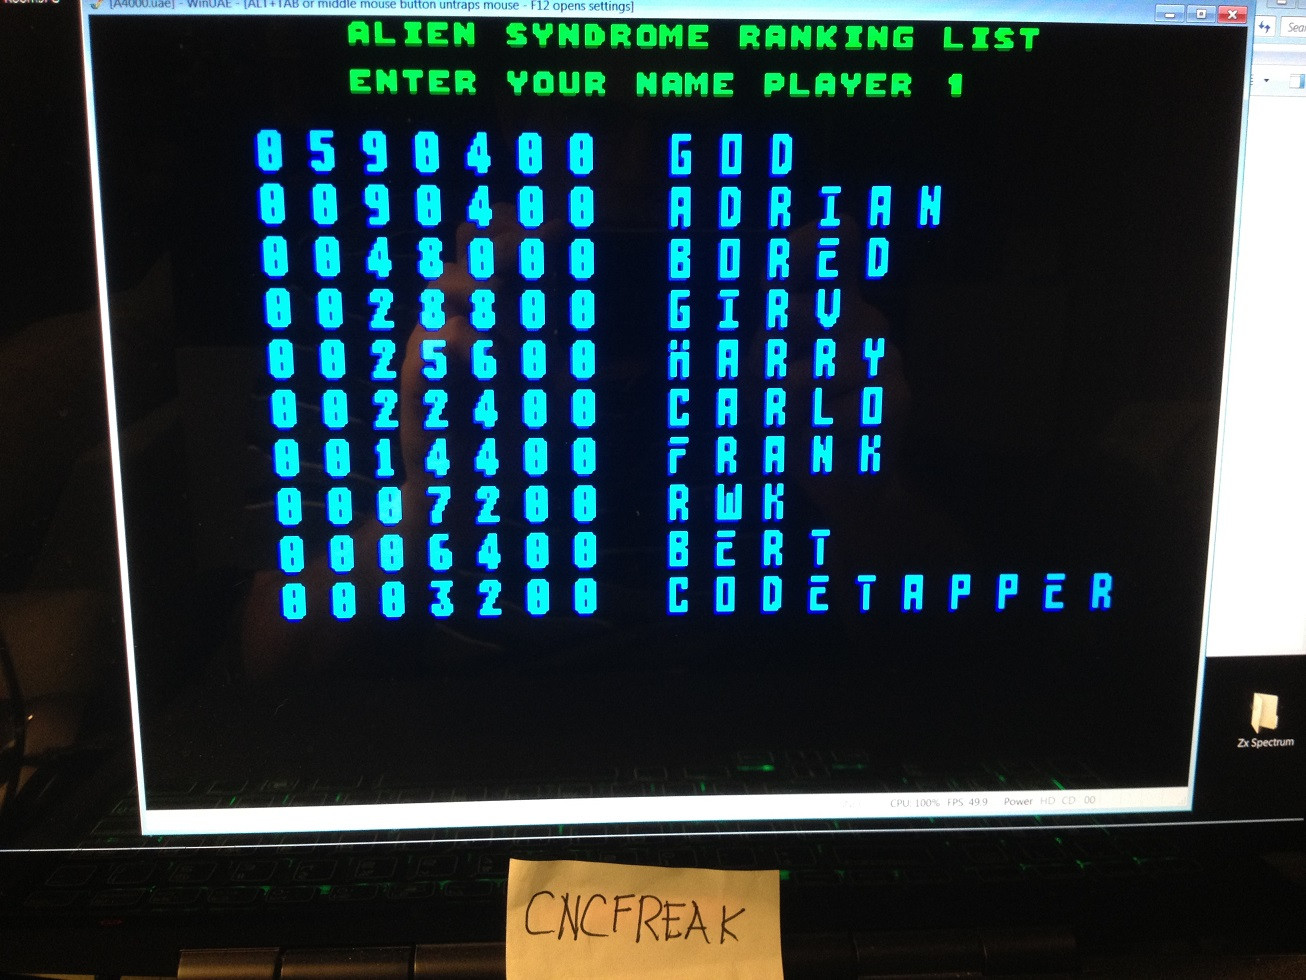 cncfreak: Alien Syndrome (Amiga Emulated) 7,200 points on 2013-10-16 23:17:04